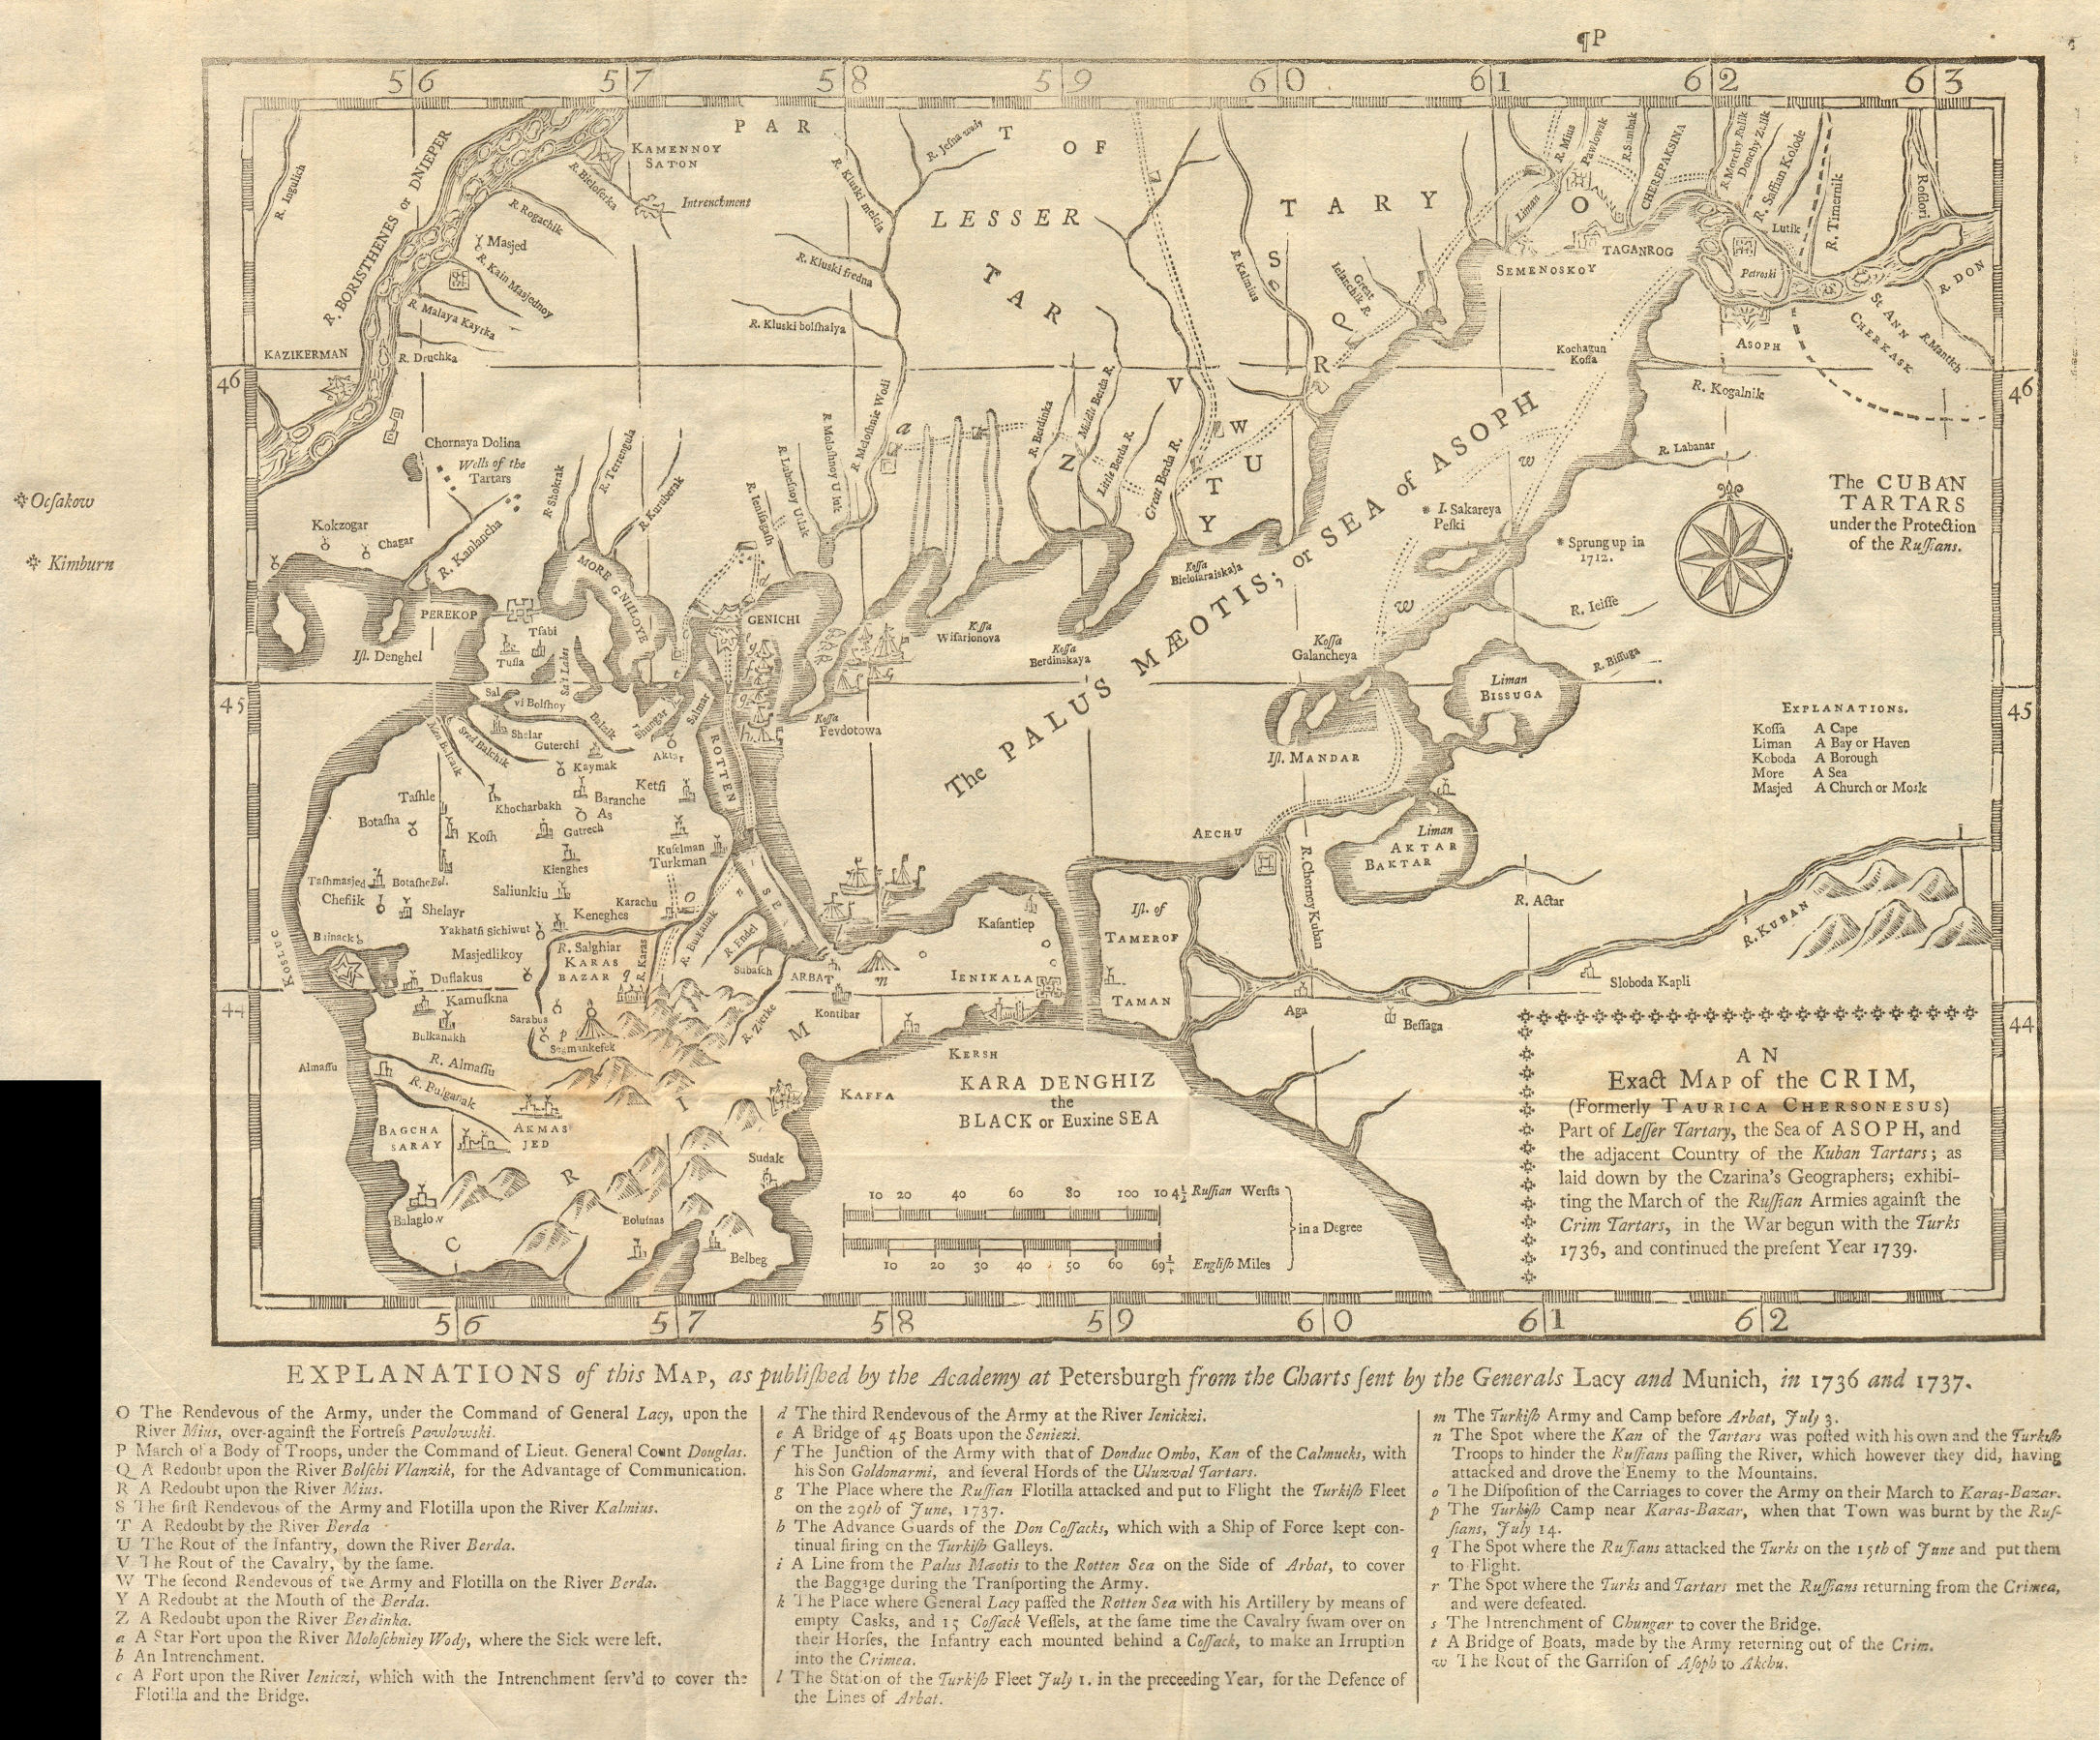 Associate Product An exact map of the Crim formerly Taurica Chersonesus. Crimea GENTS MAG 1739